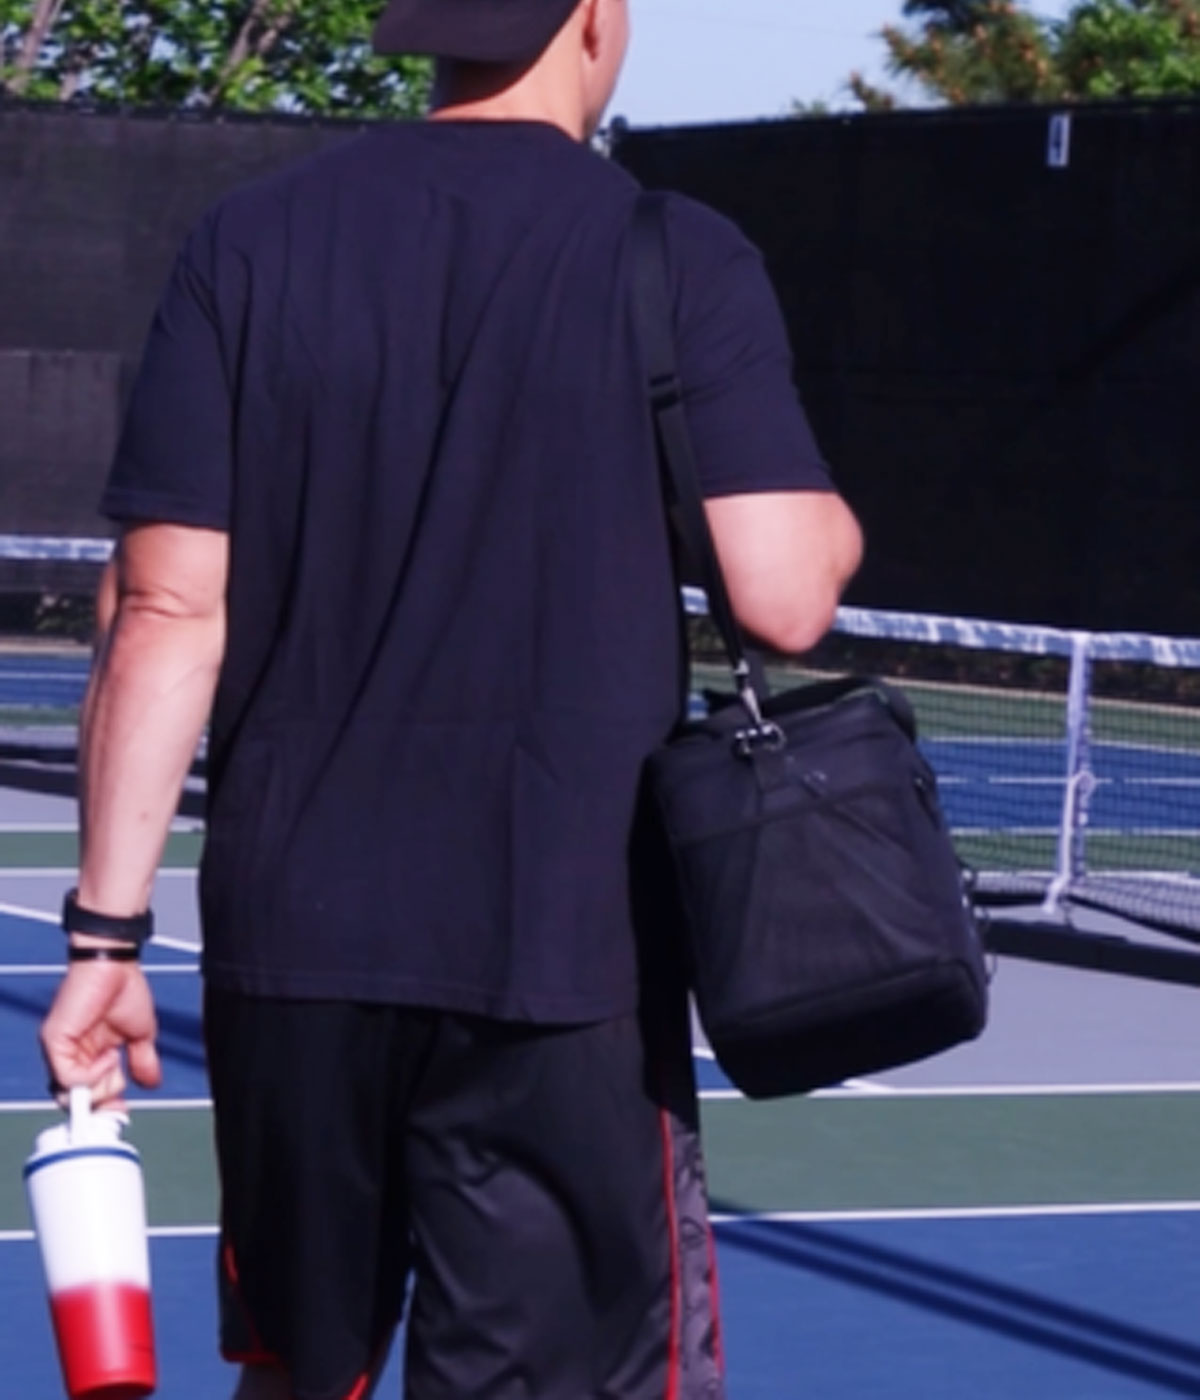 This image shows a man carrying The Duffel by its shoulder strap as he walks onto a Pickle Ball court.